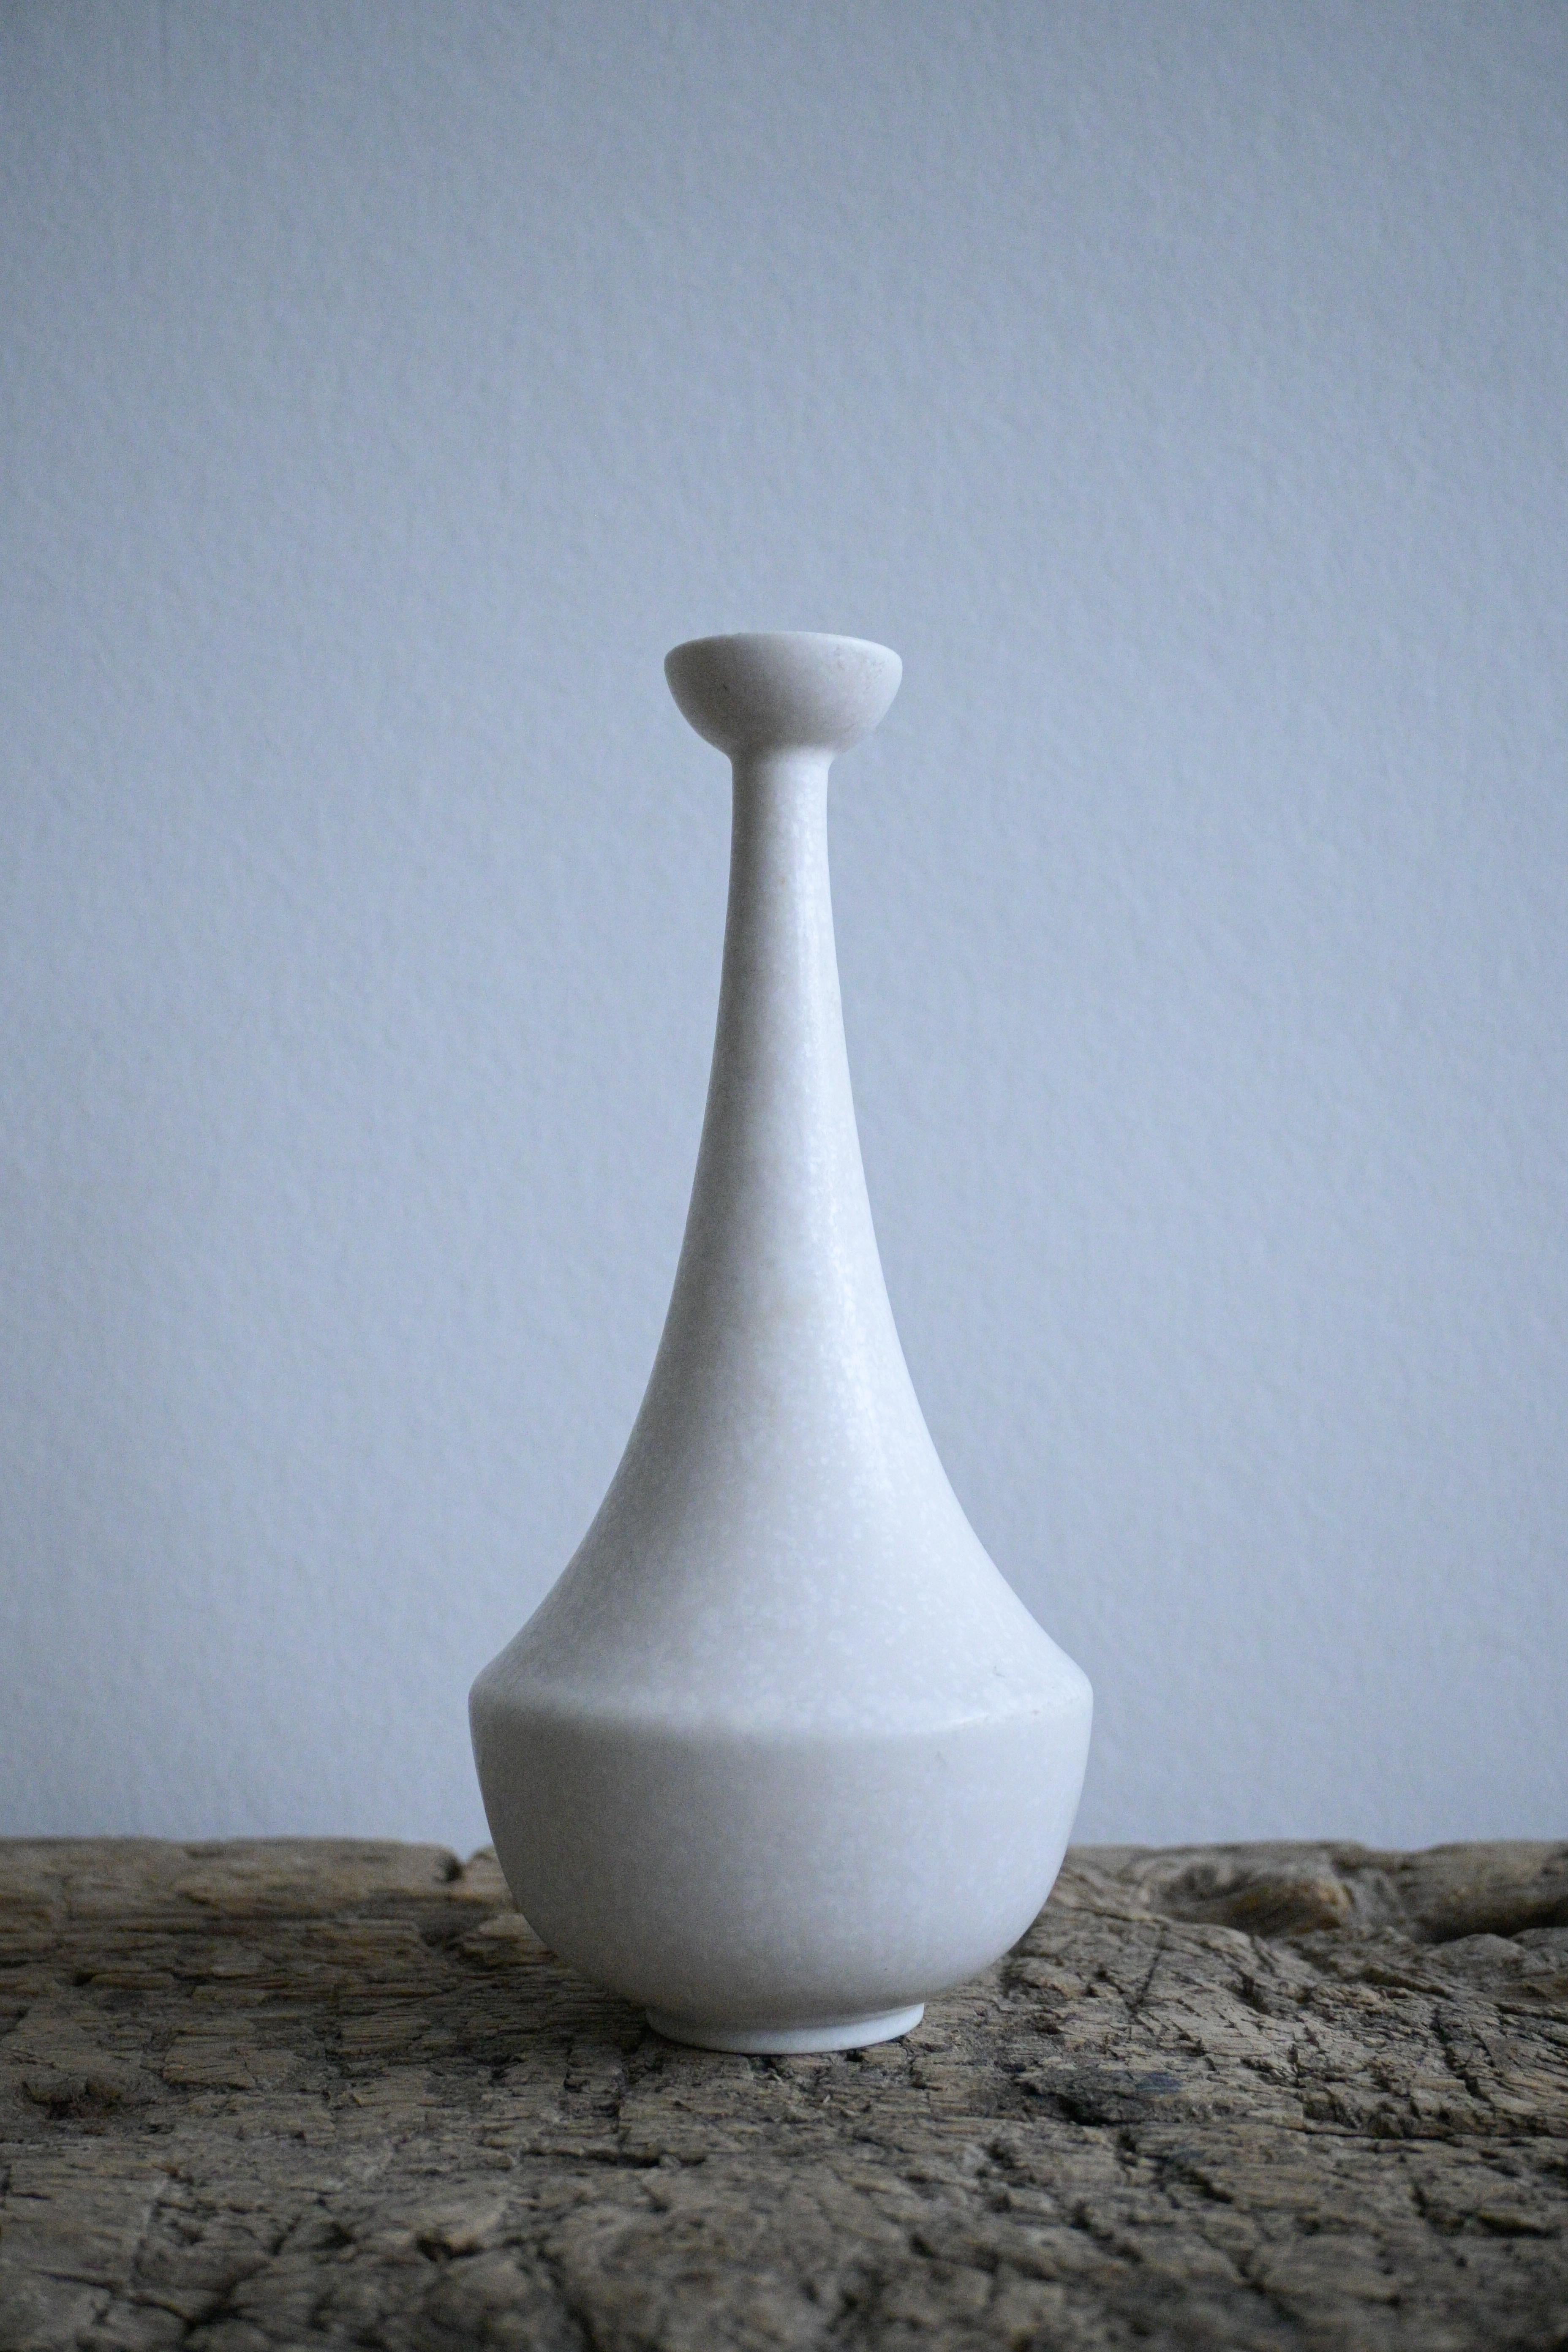 Rare Egg-shell Mimosa White Vase by Gunnar Nylund for Rörstrand, Sweden, 1950s

The vase is marked as 1st quality and is in excellent condition.


Gunnar Nylund (1904-1997) was a renowned Swedish ceramic artist and designer known for his significant